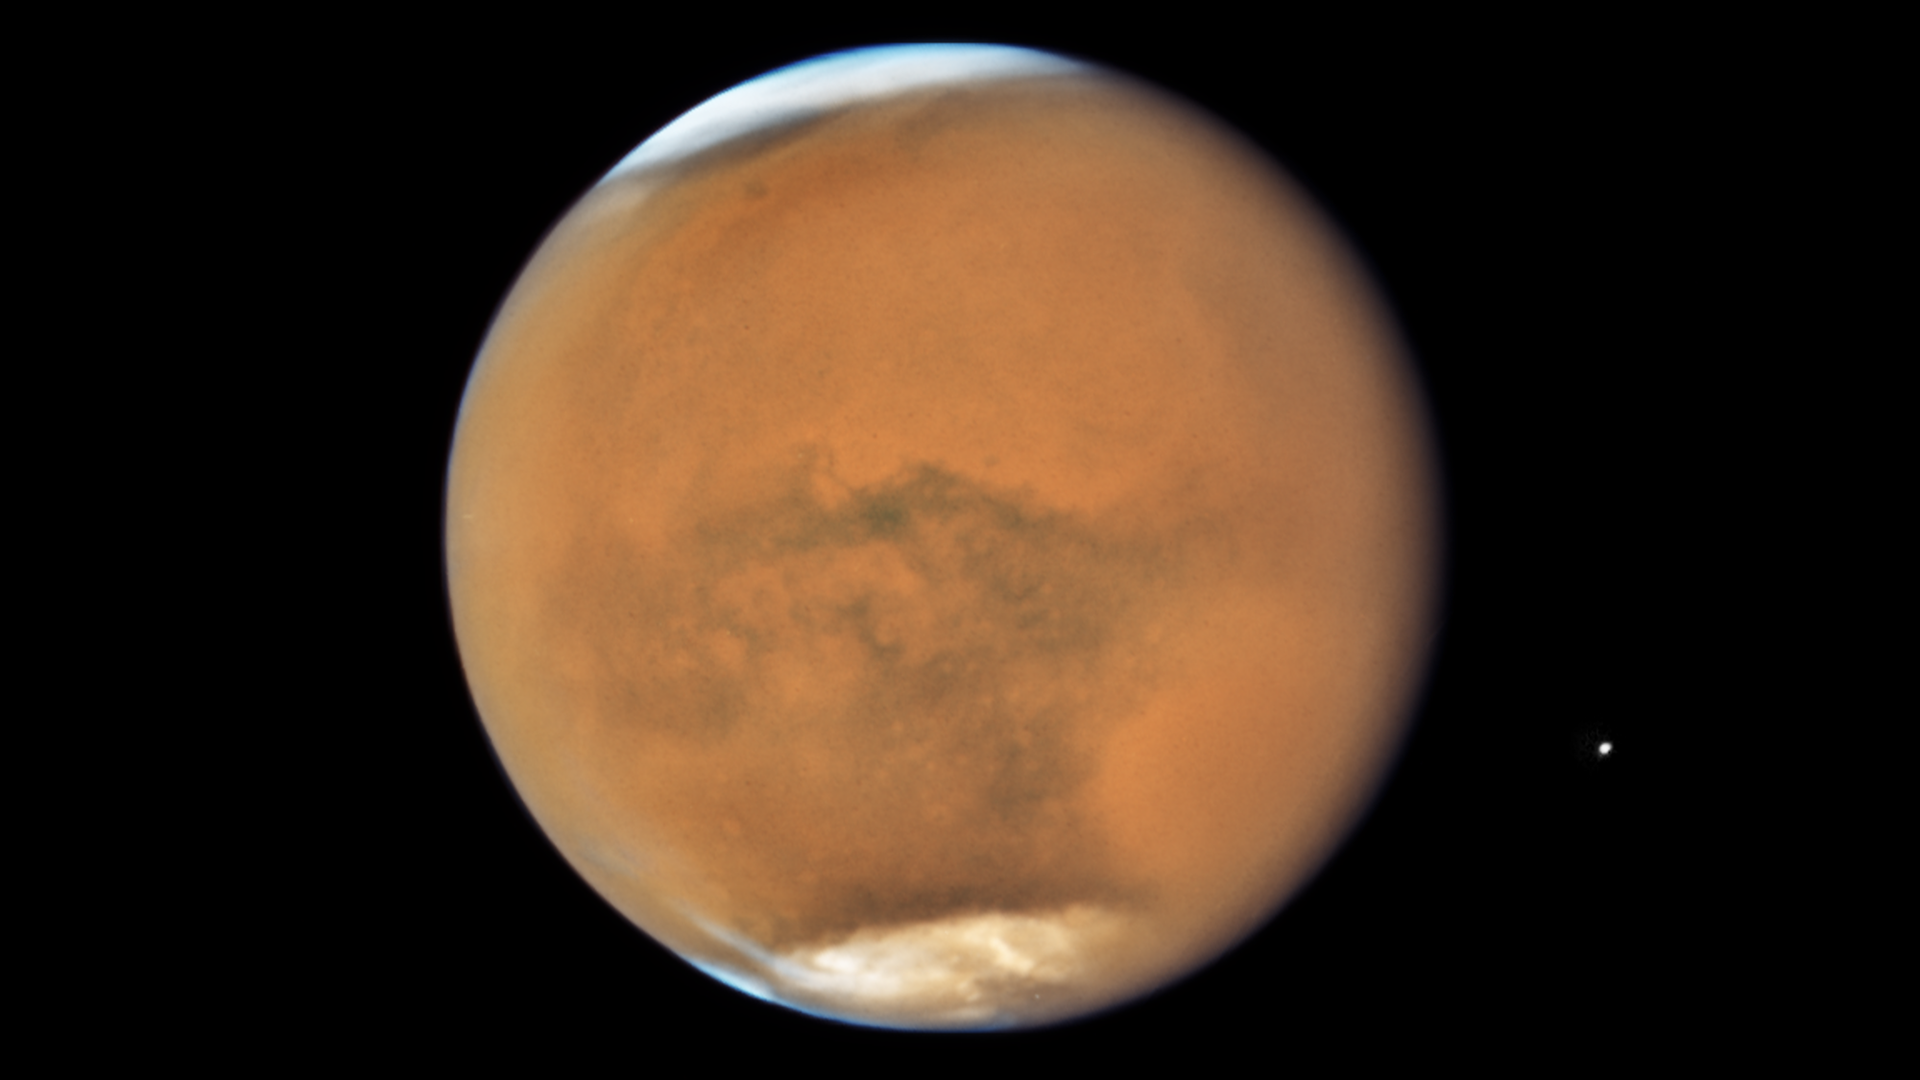 Mars in full view with its polar ice caps in white